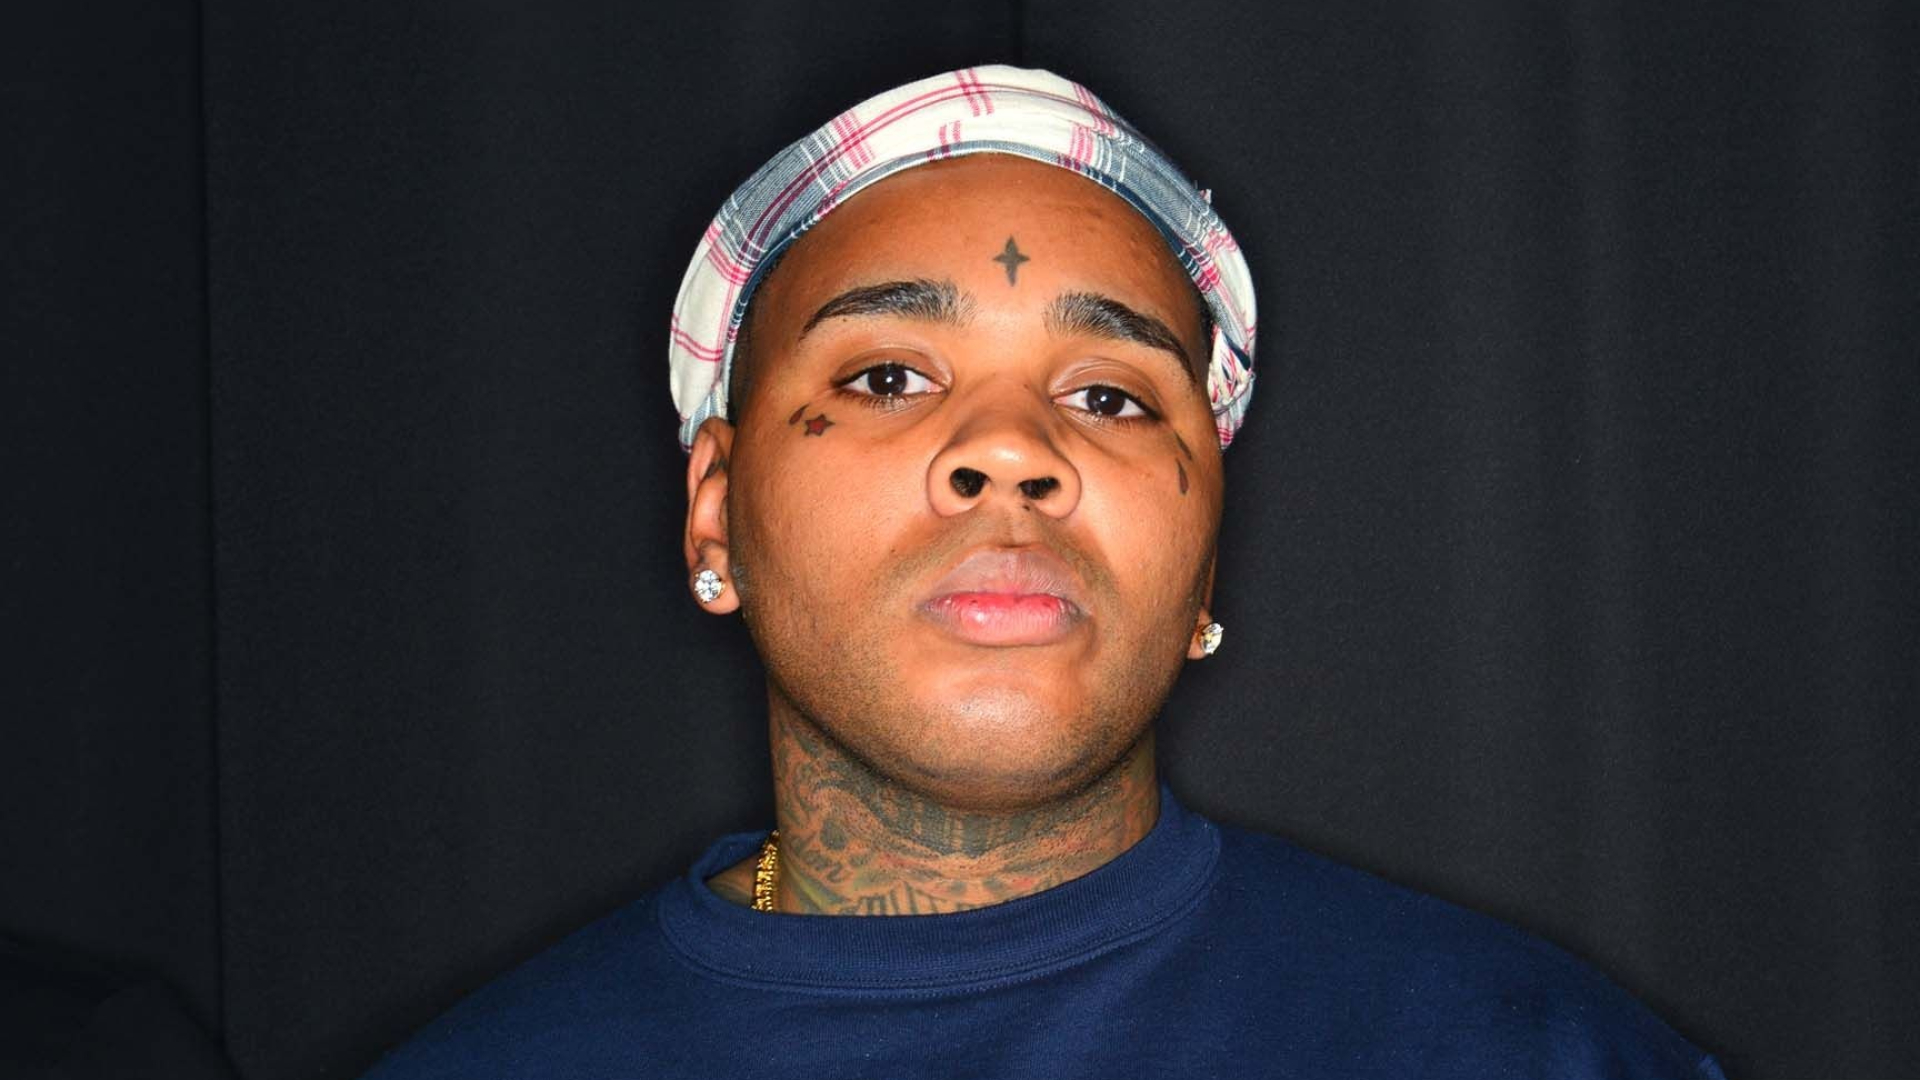 HD wallpaper, Dope Wallpapers, 1920X1080 Full Hd Desktop, Desktop Full Hd Kevin Gates Background Image, Creative Expression, Music Inspired Visuals, Kevin Gates